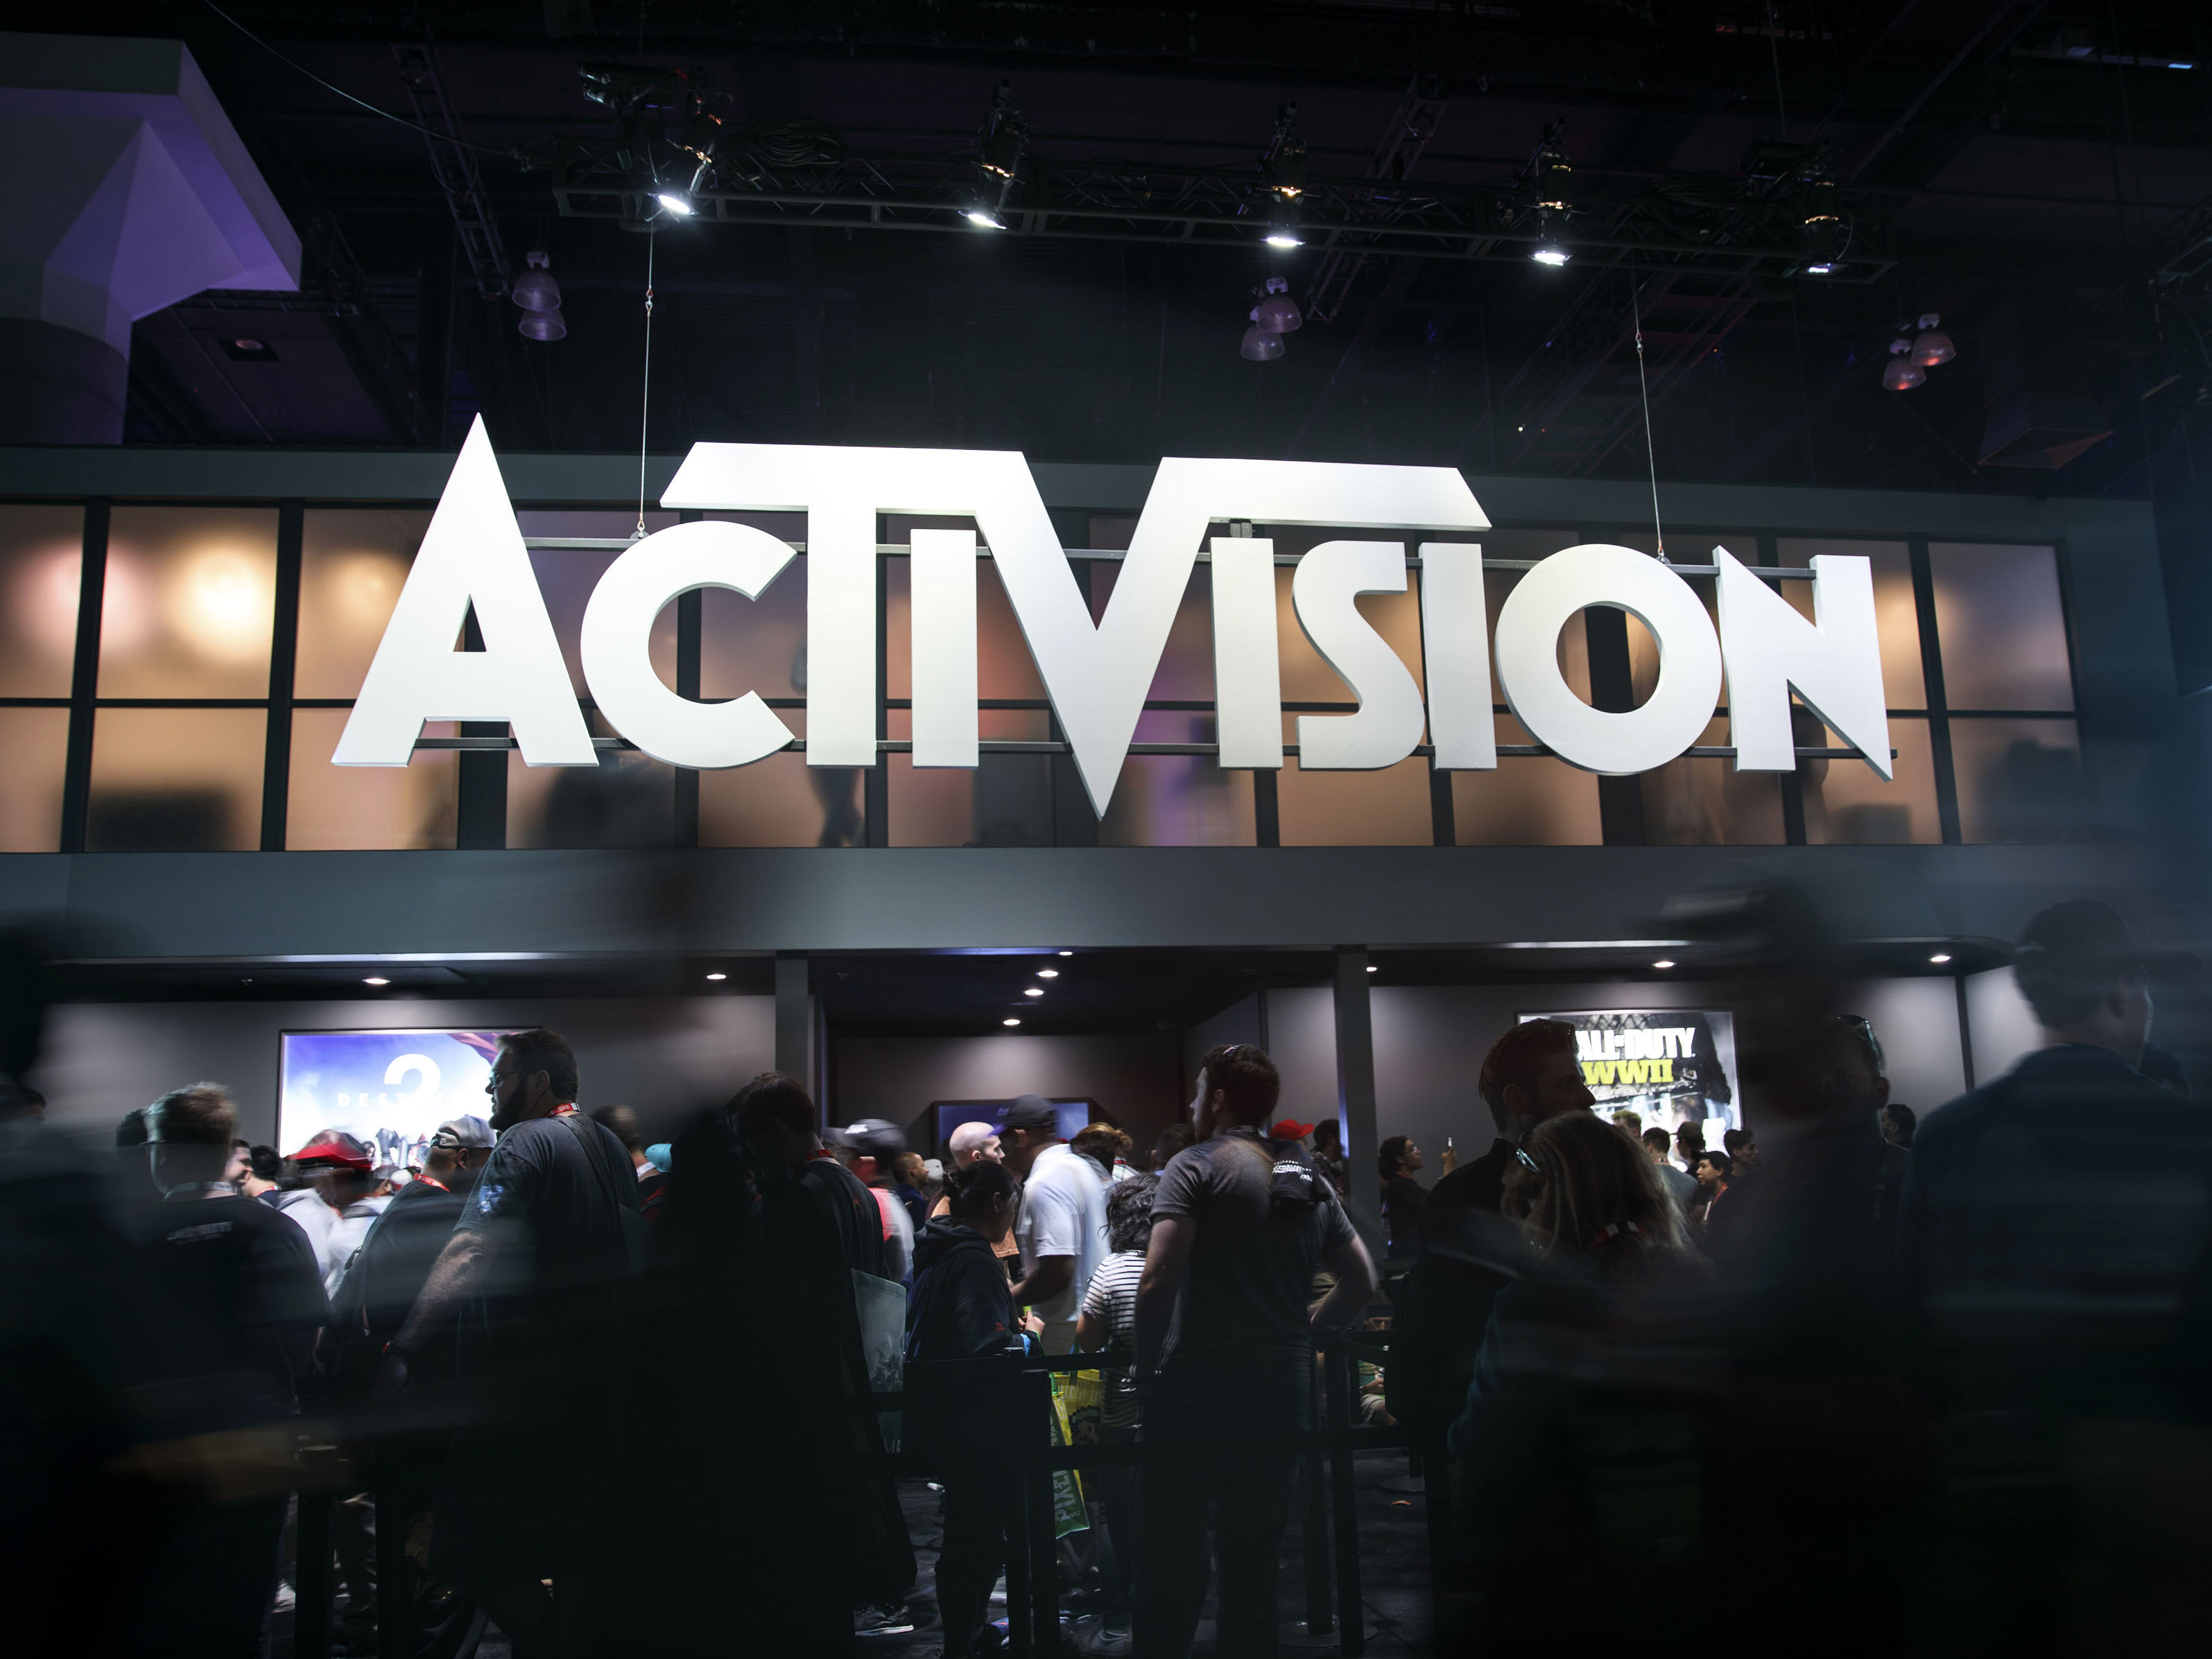 Microsoft's Activision Blizzard deal has been blocked by the FTC – for now,  at least